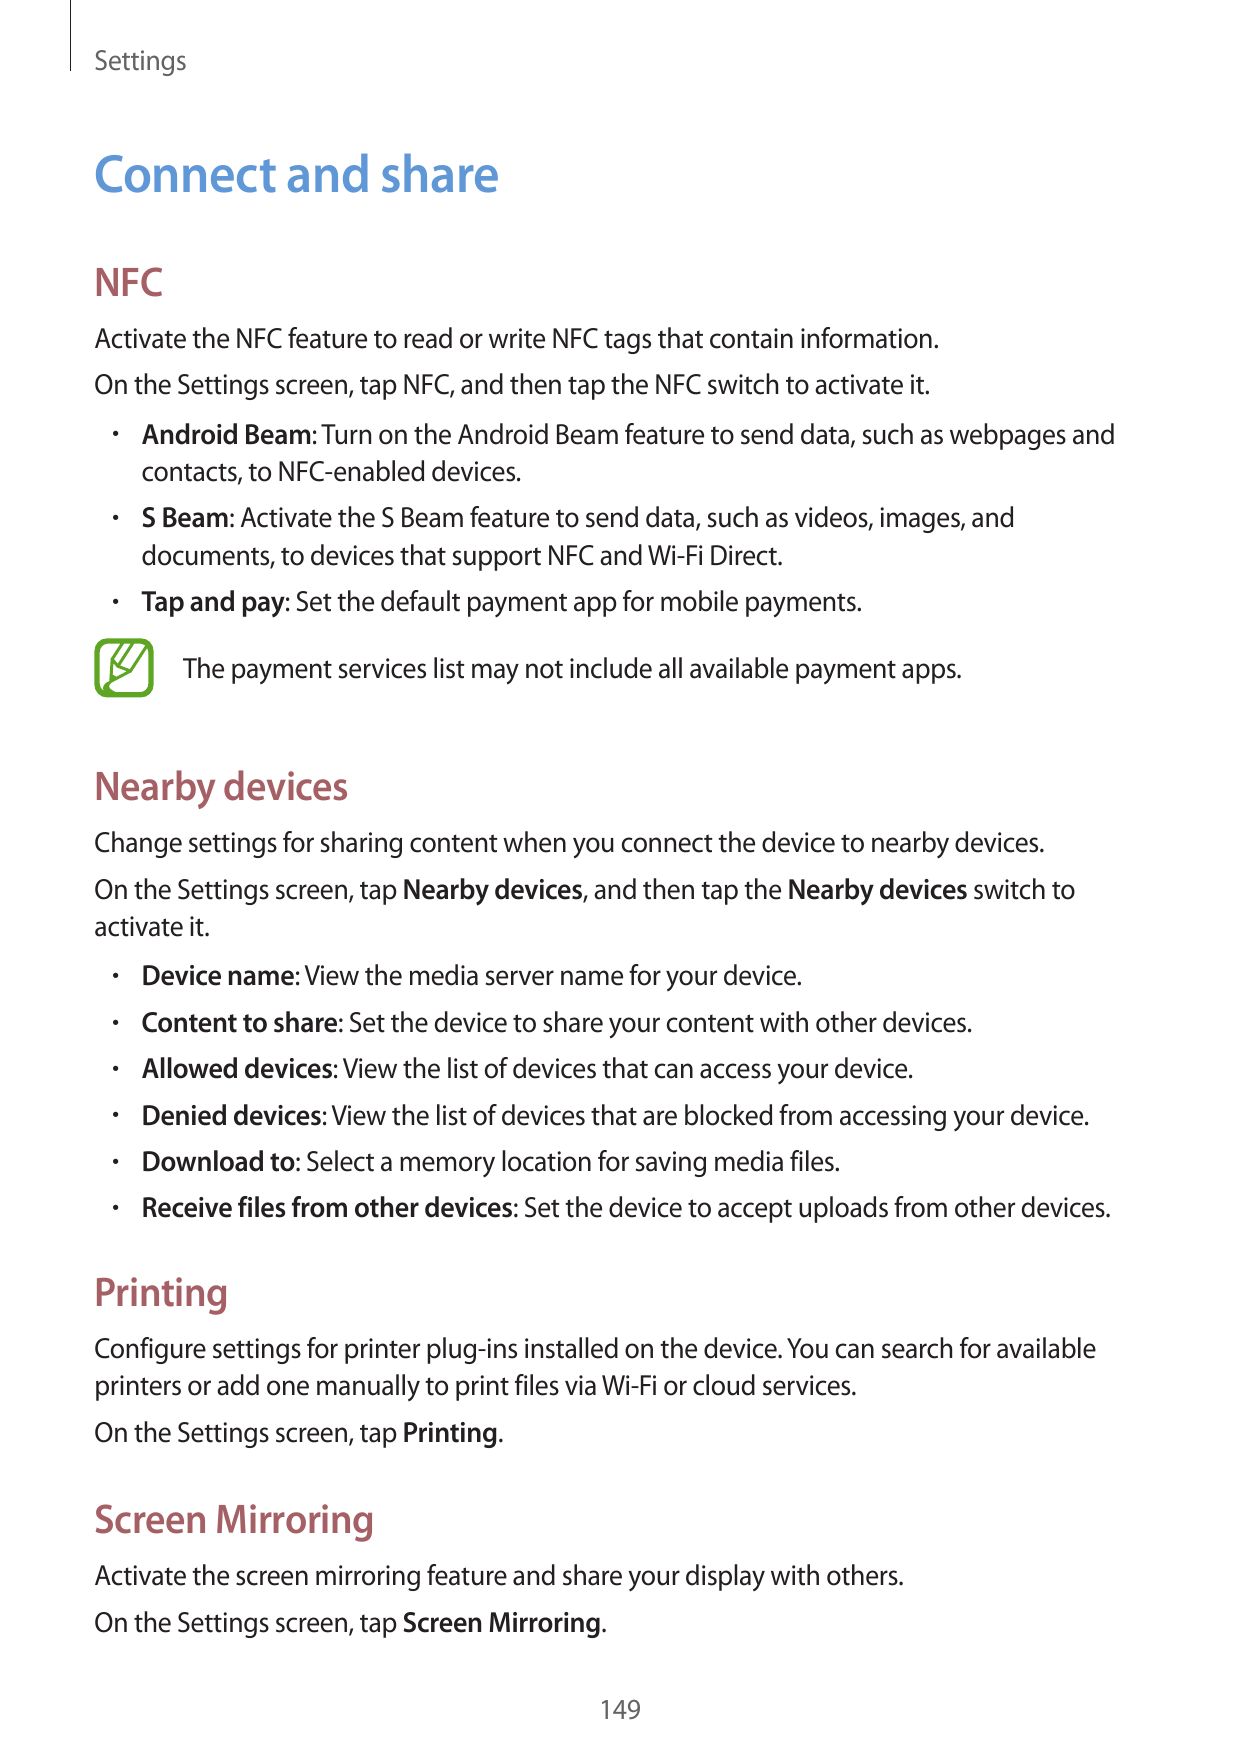 SettingsConnect and shareNFCActivate the NFC feature to read or write NFC tags that contain information.On the Settings screen, 